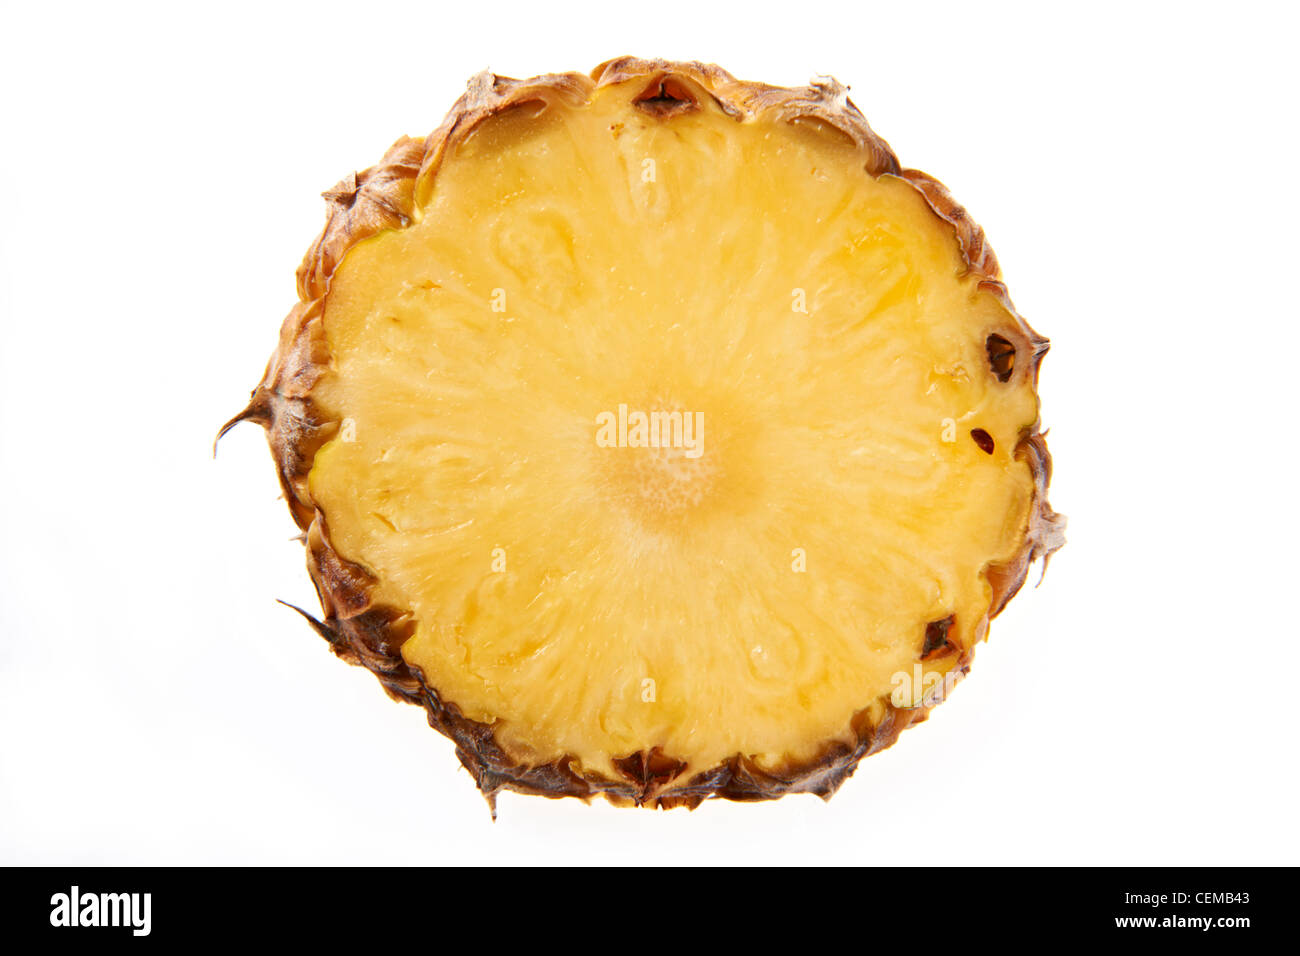 Overhead view of slice of pineapple on plain background Stock Photo